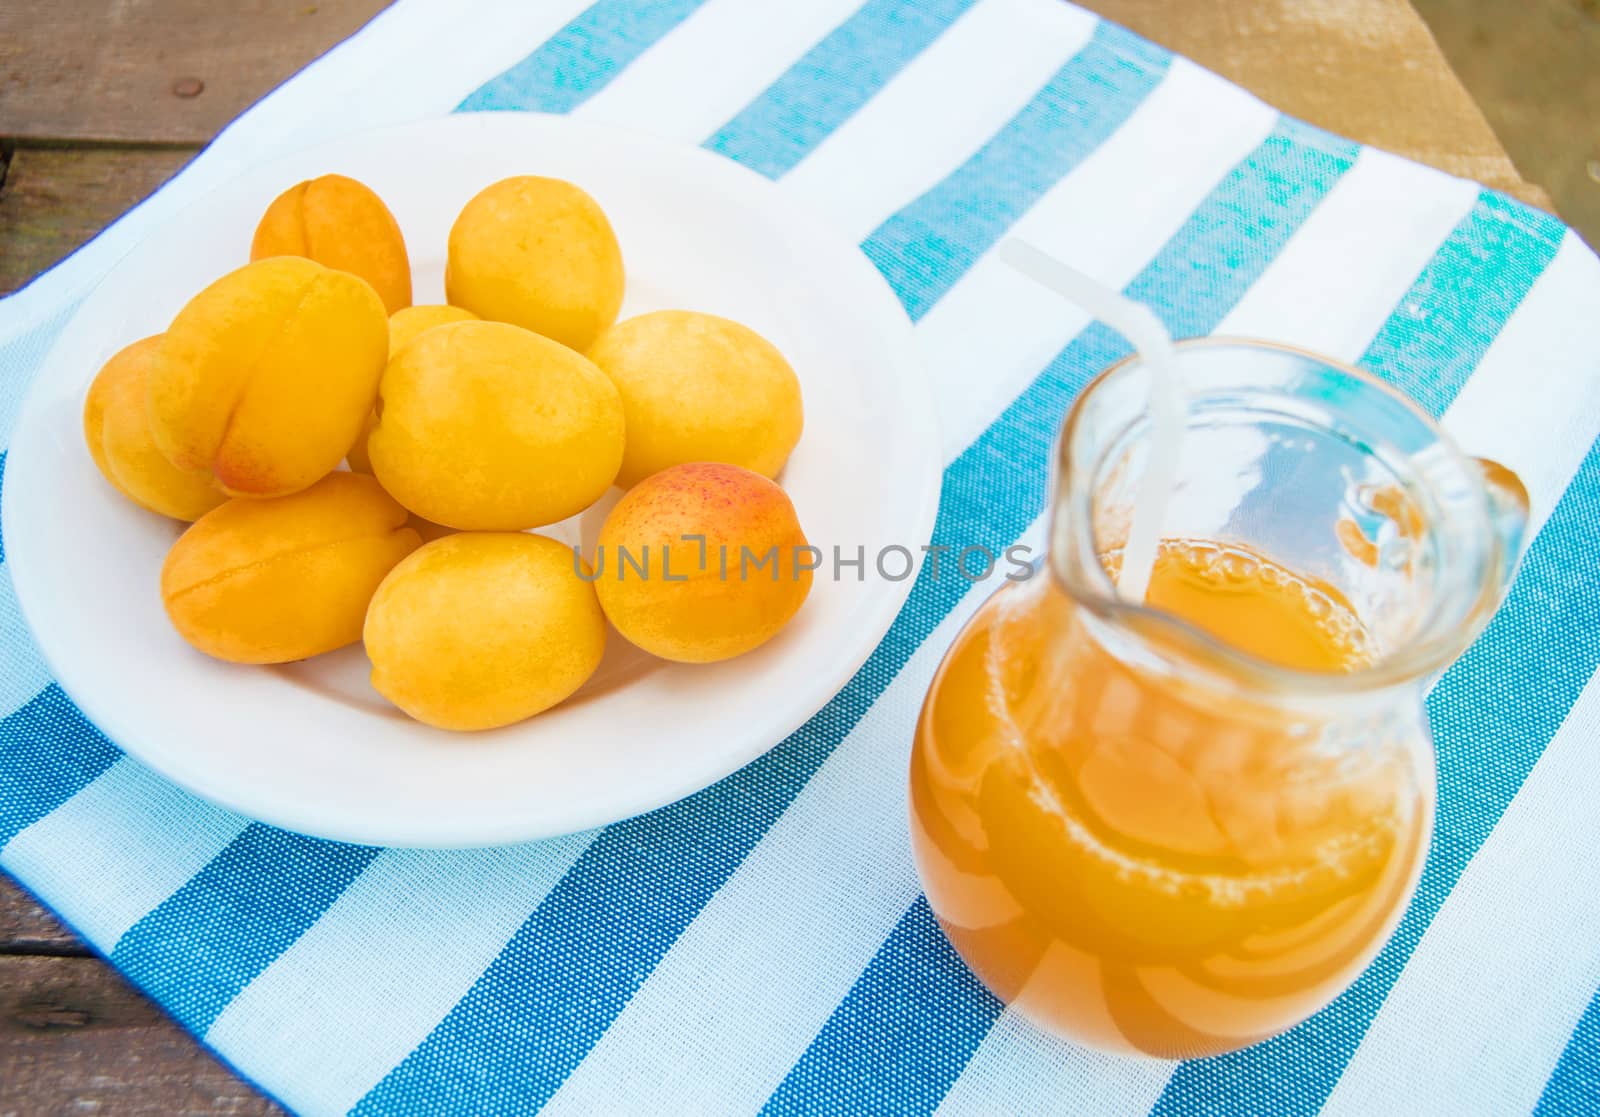 Summer drink and fruit-fresh apricot juice in a glass jug and ripe apricots on a napkin, outdoors on a Sunny day.